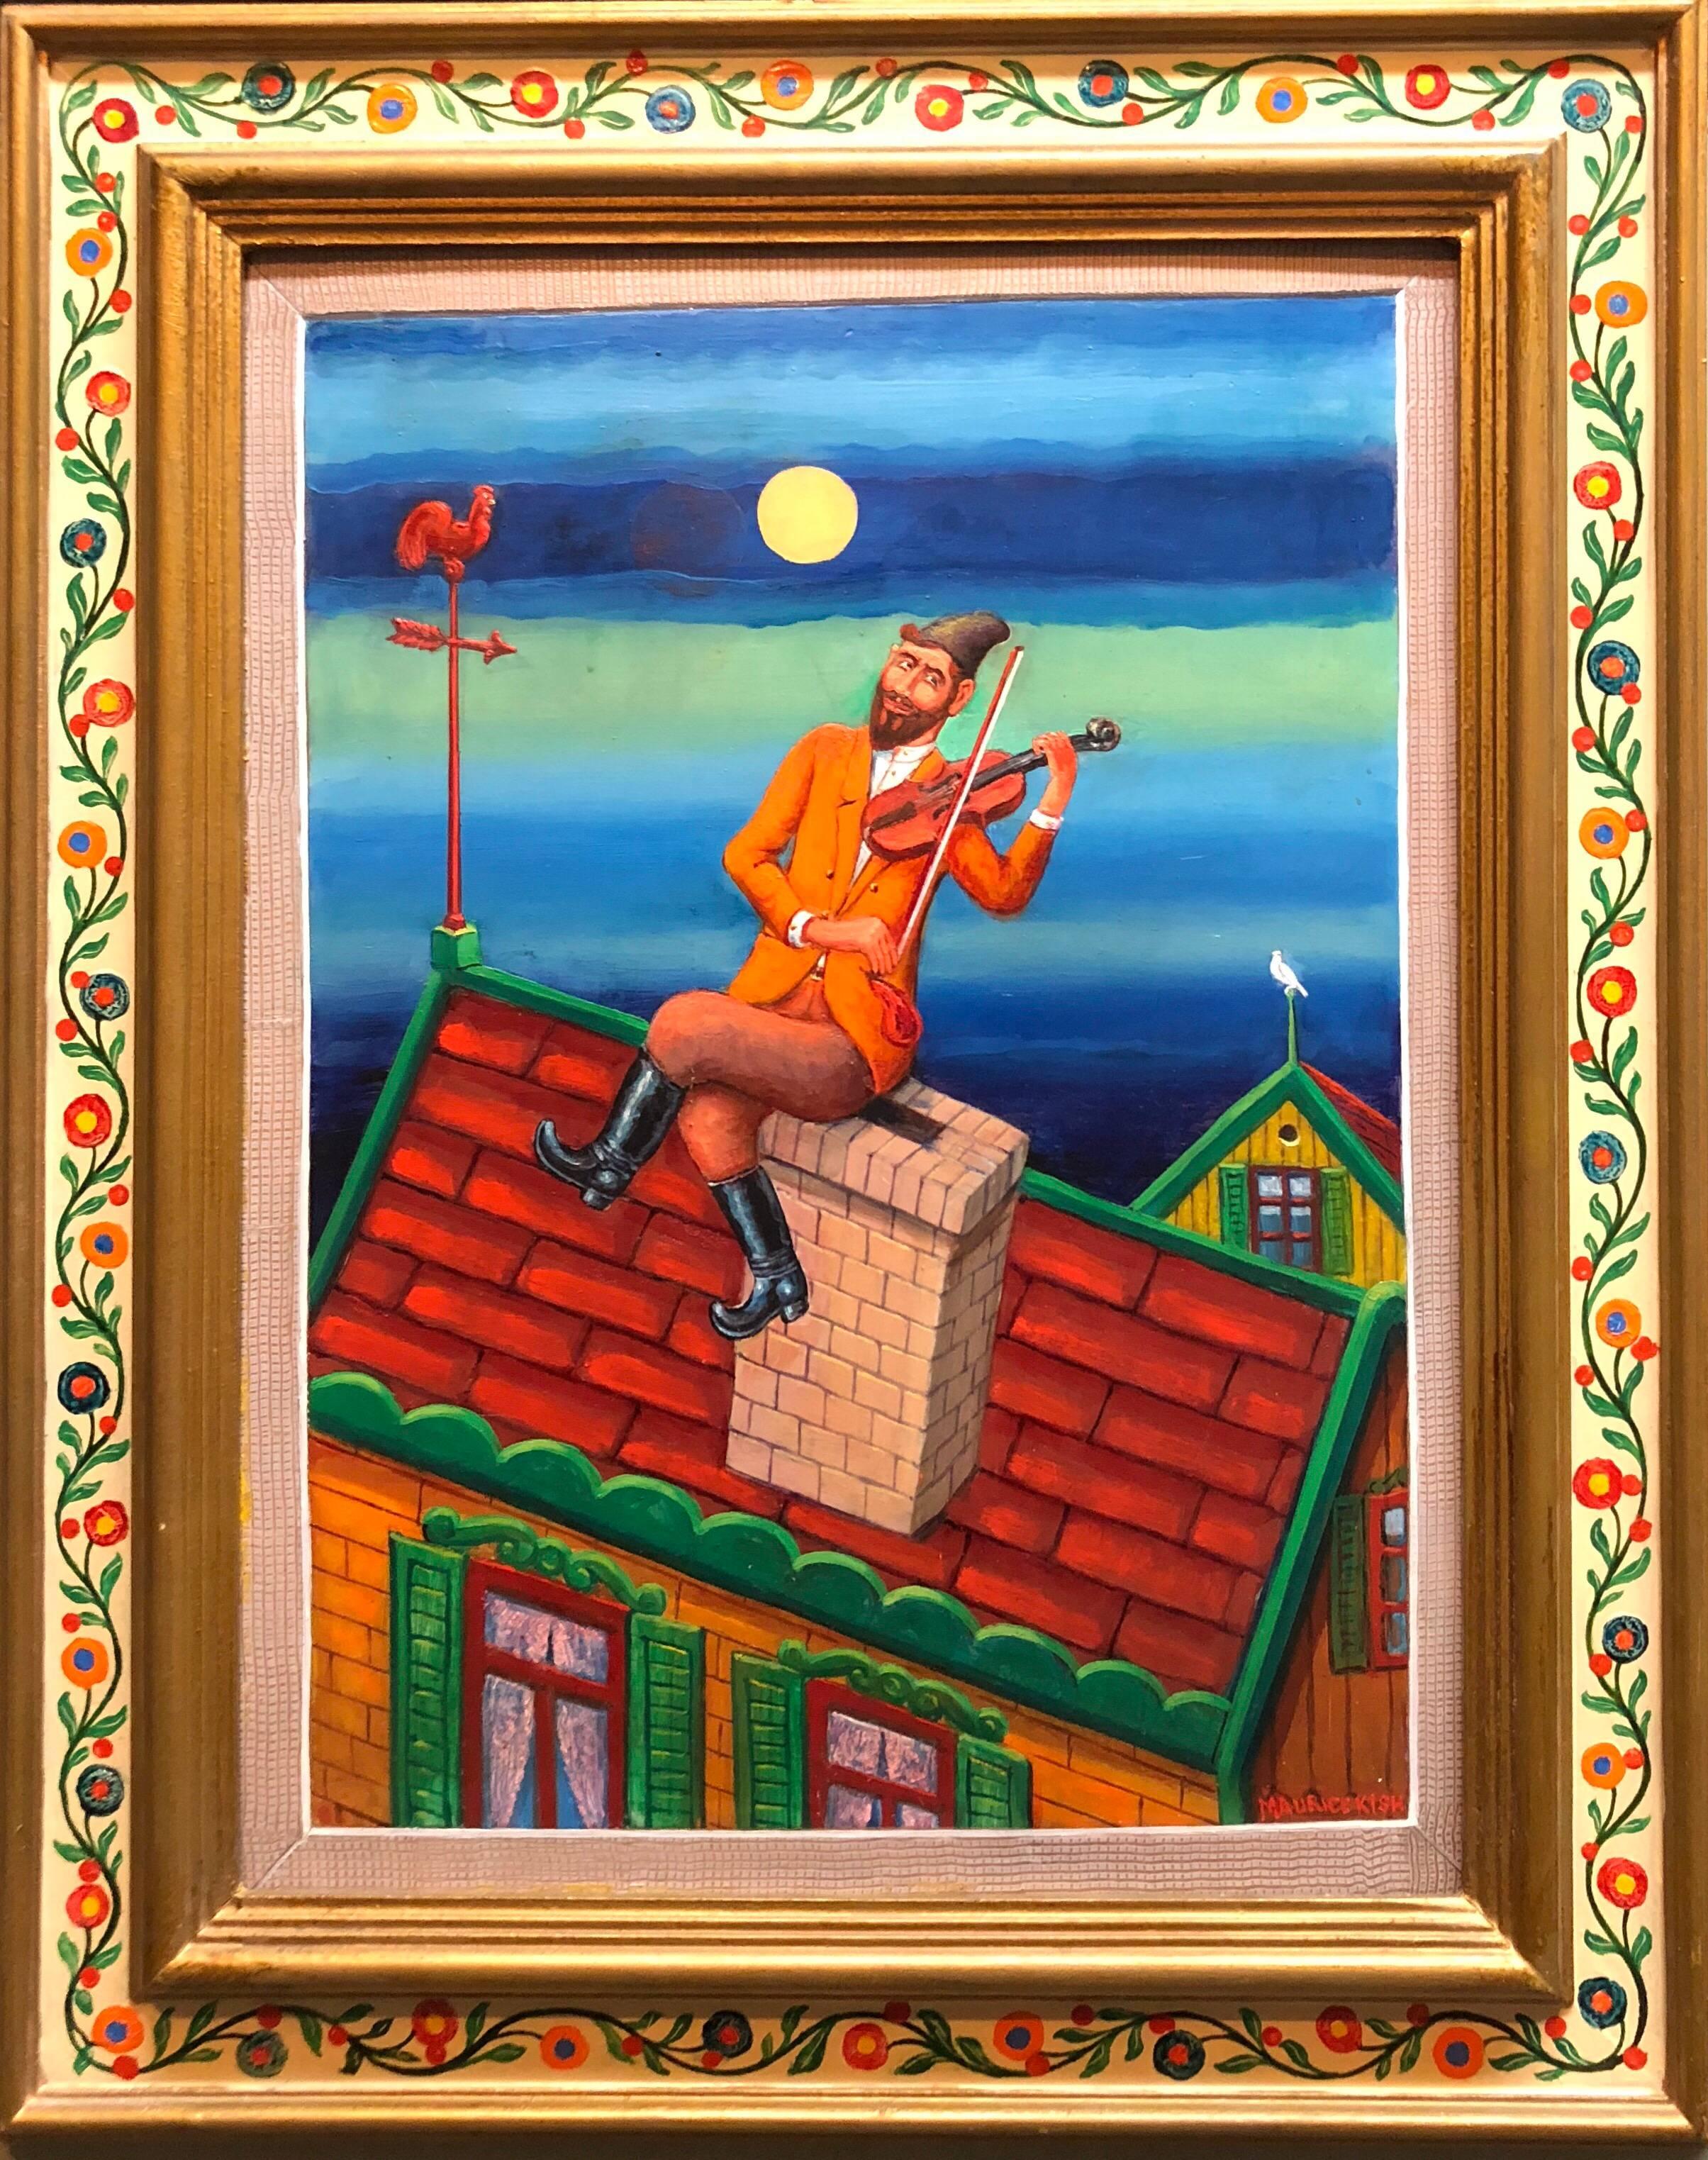 Genre: Modern
Subject: Fiddler on the roof
Medium: Oil
Surface: Board, size includes artist decorated frame
Country: United States

The imagery of Maurice Kish (1895-1987), whether factories or carousels, reliably subverts expectations. His vision